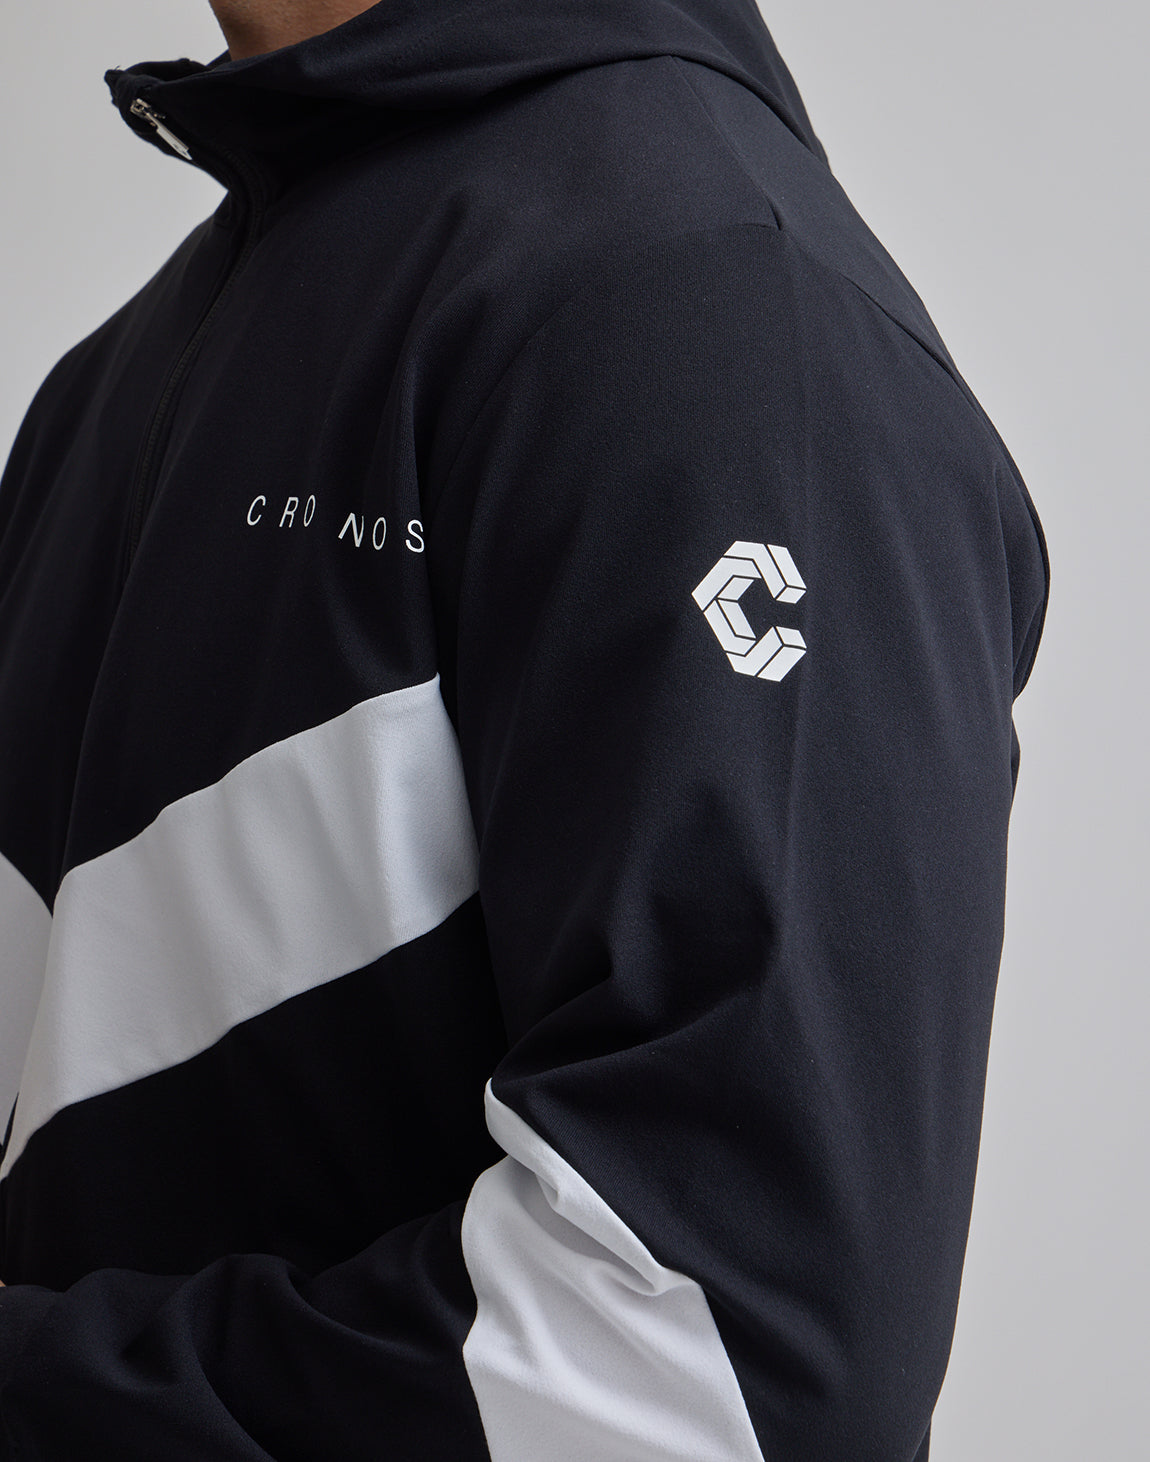 CRONOS STRETCH DRY JACKET – クロノス CRONOS Official Store